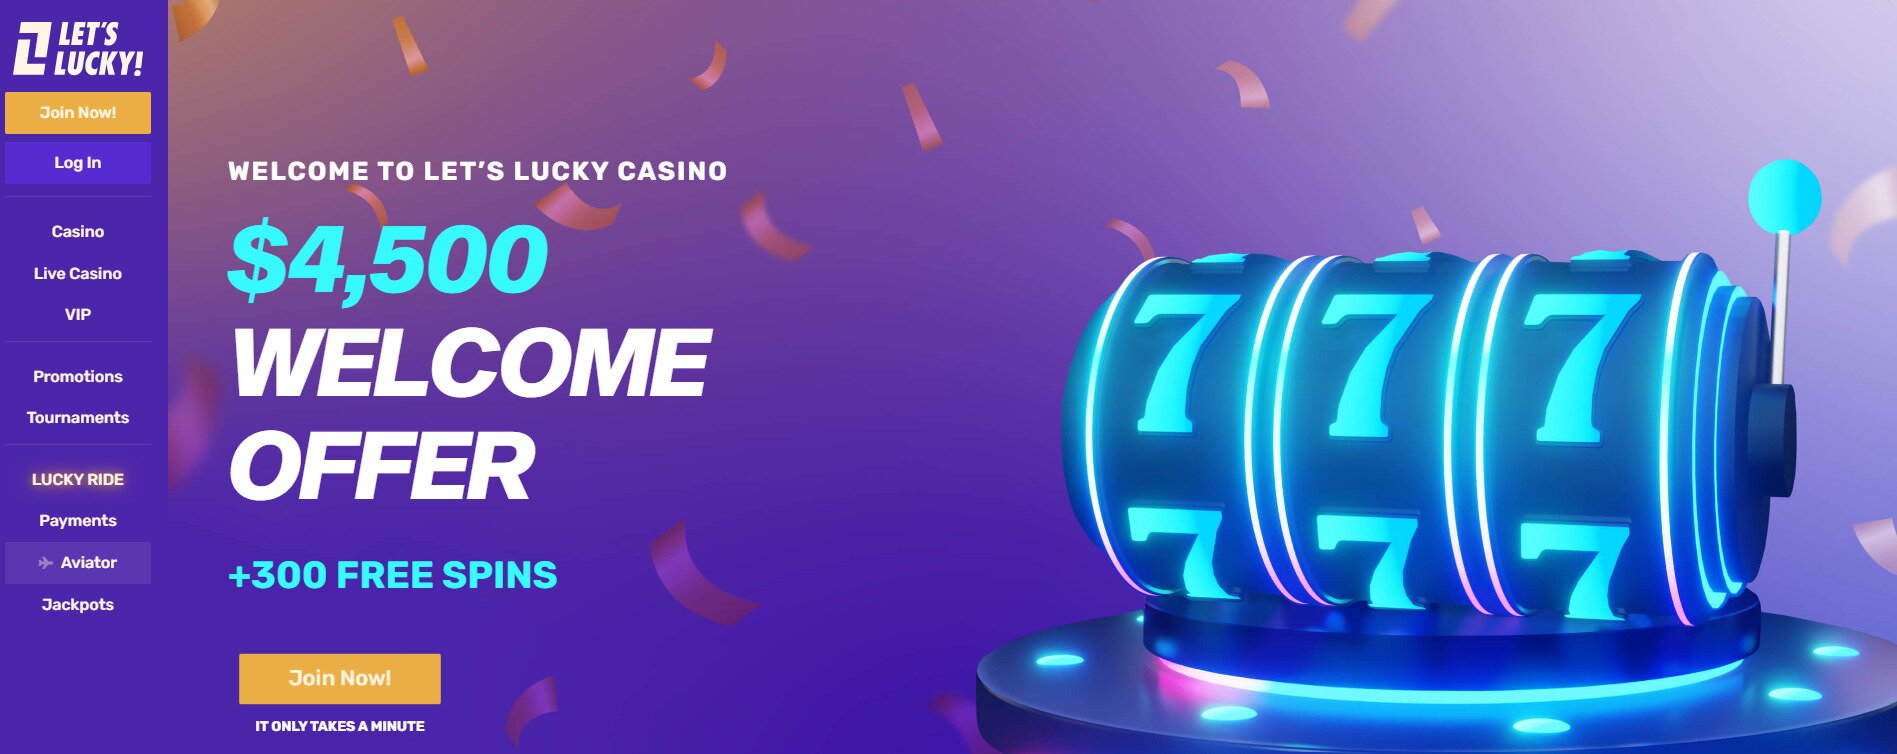 Let's Lucky Casino new welcome offer